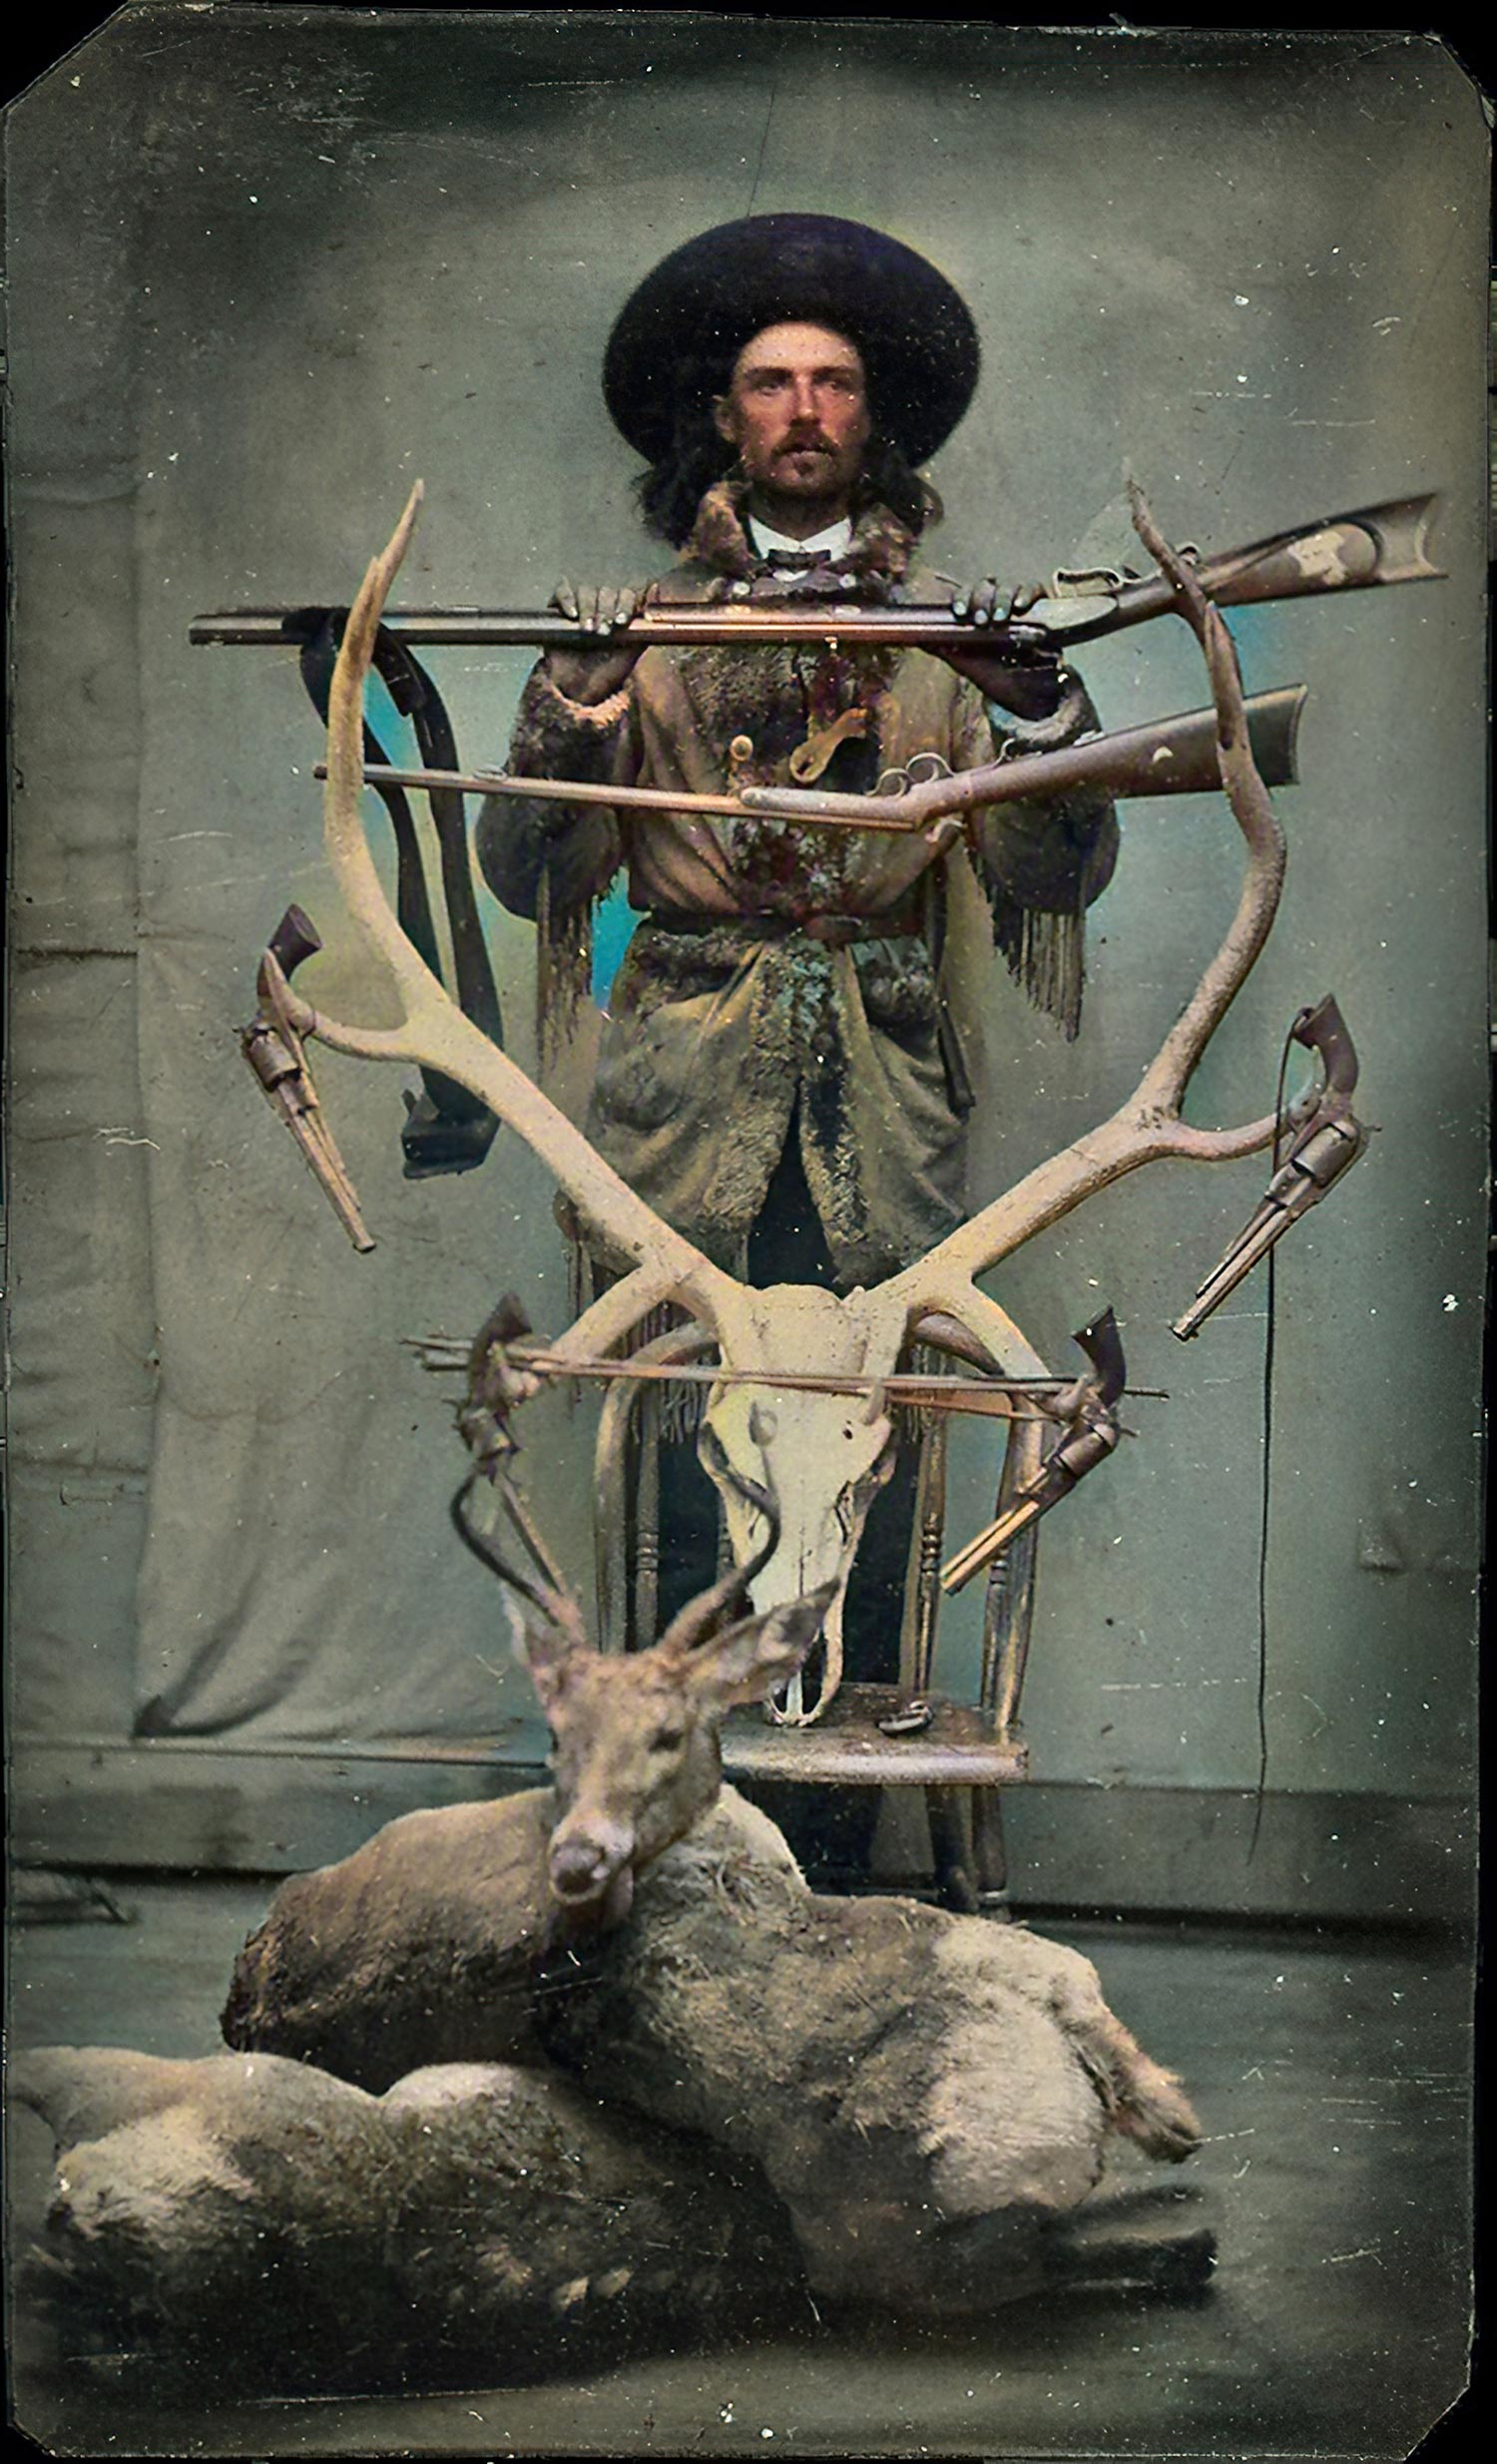 Buffalo Bill Cody photographed with an elk skull and deer.